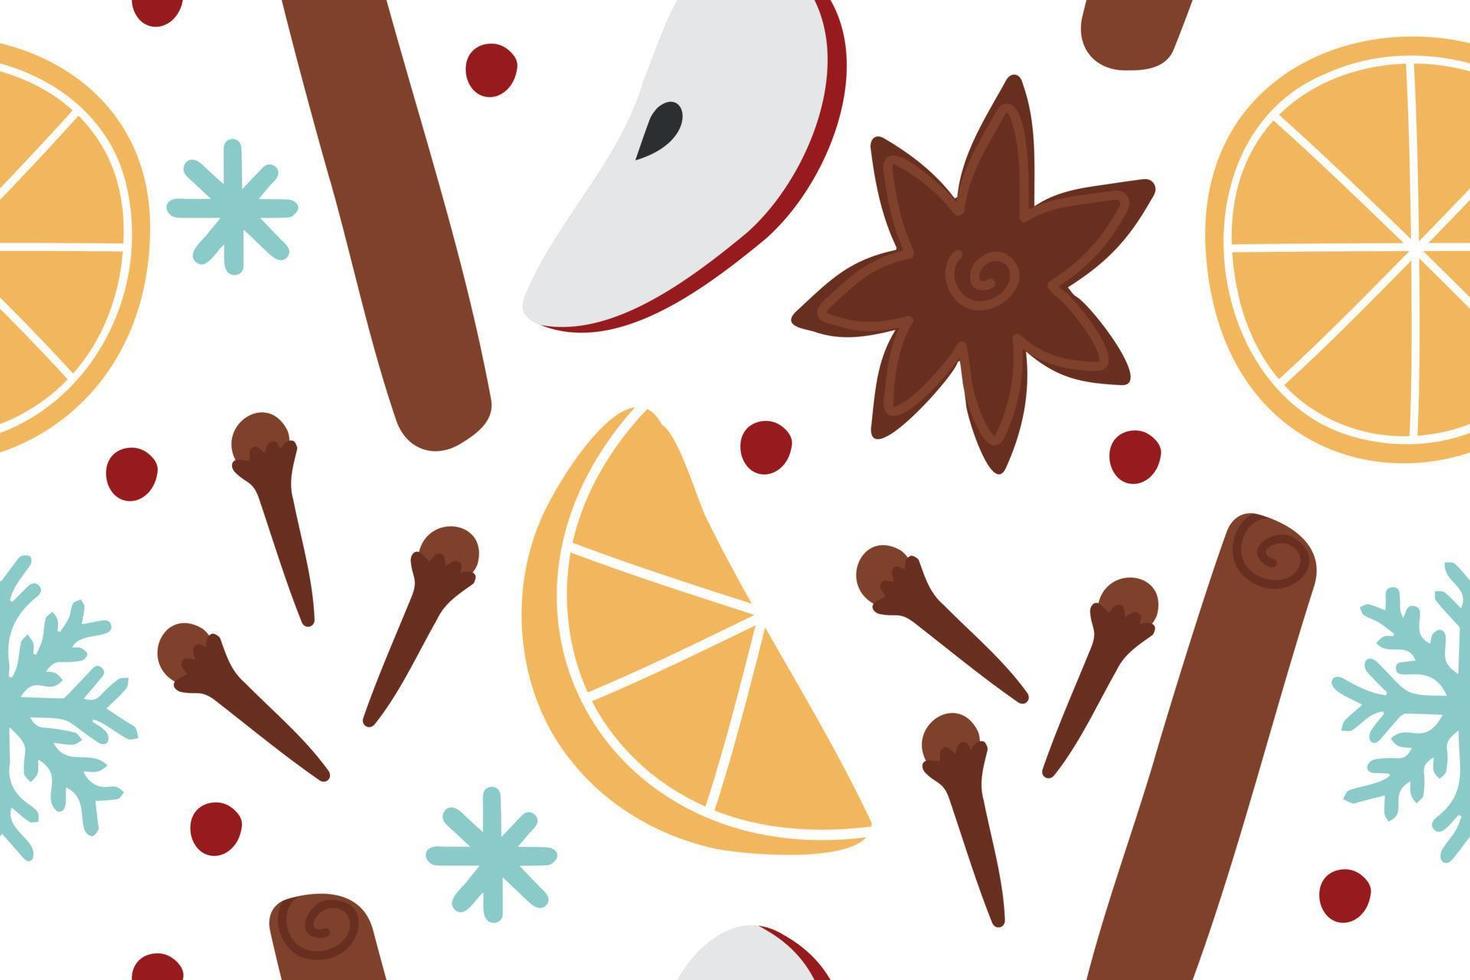 Christmas winter spice. Decorative vector seamless pattern with spices and ingredients for mulled wine. Orange, cranberry, cinnamon, star anise, clove on white background.